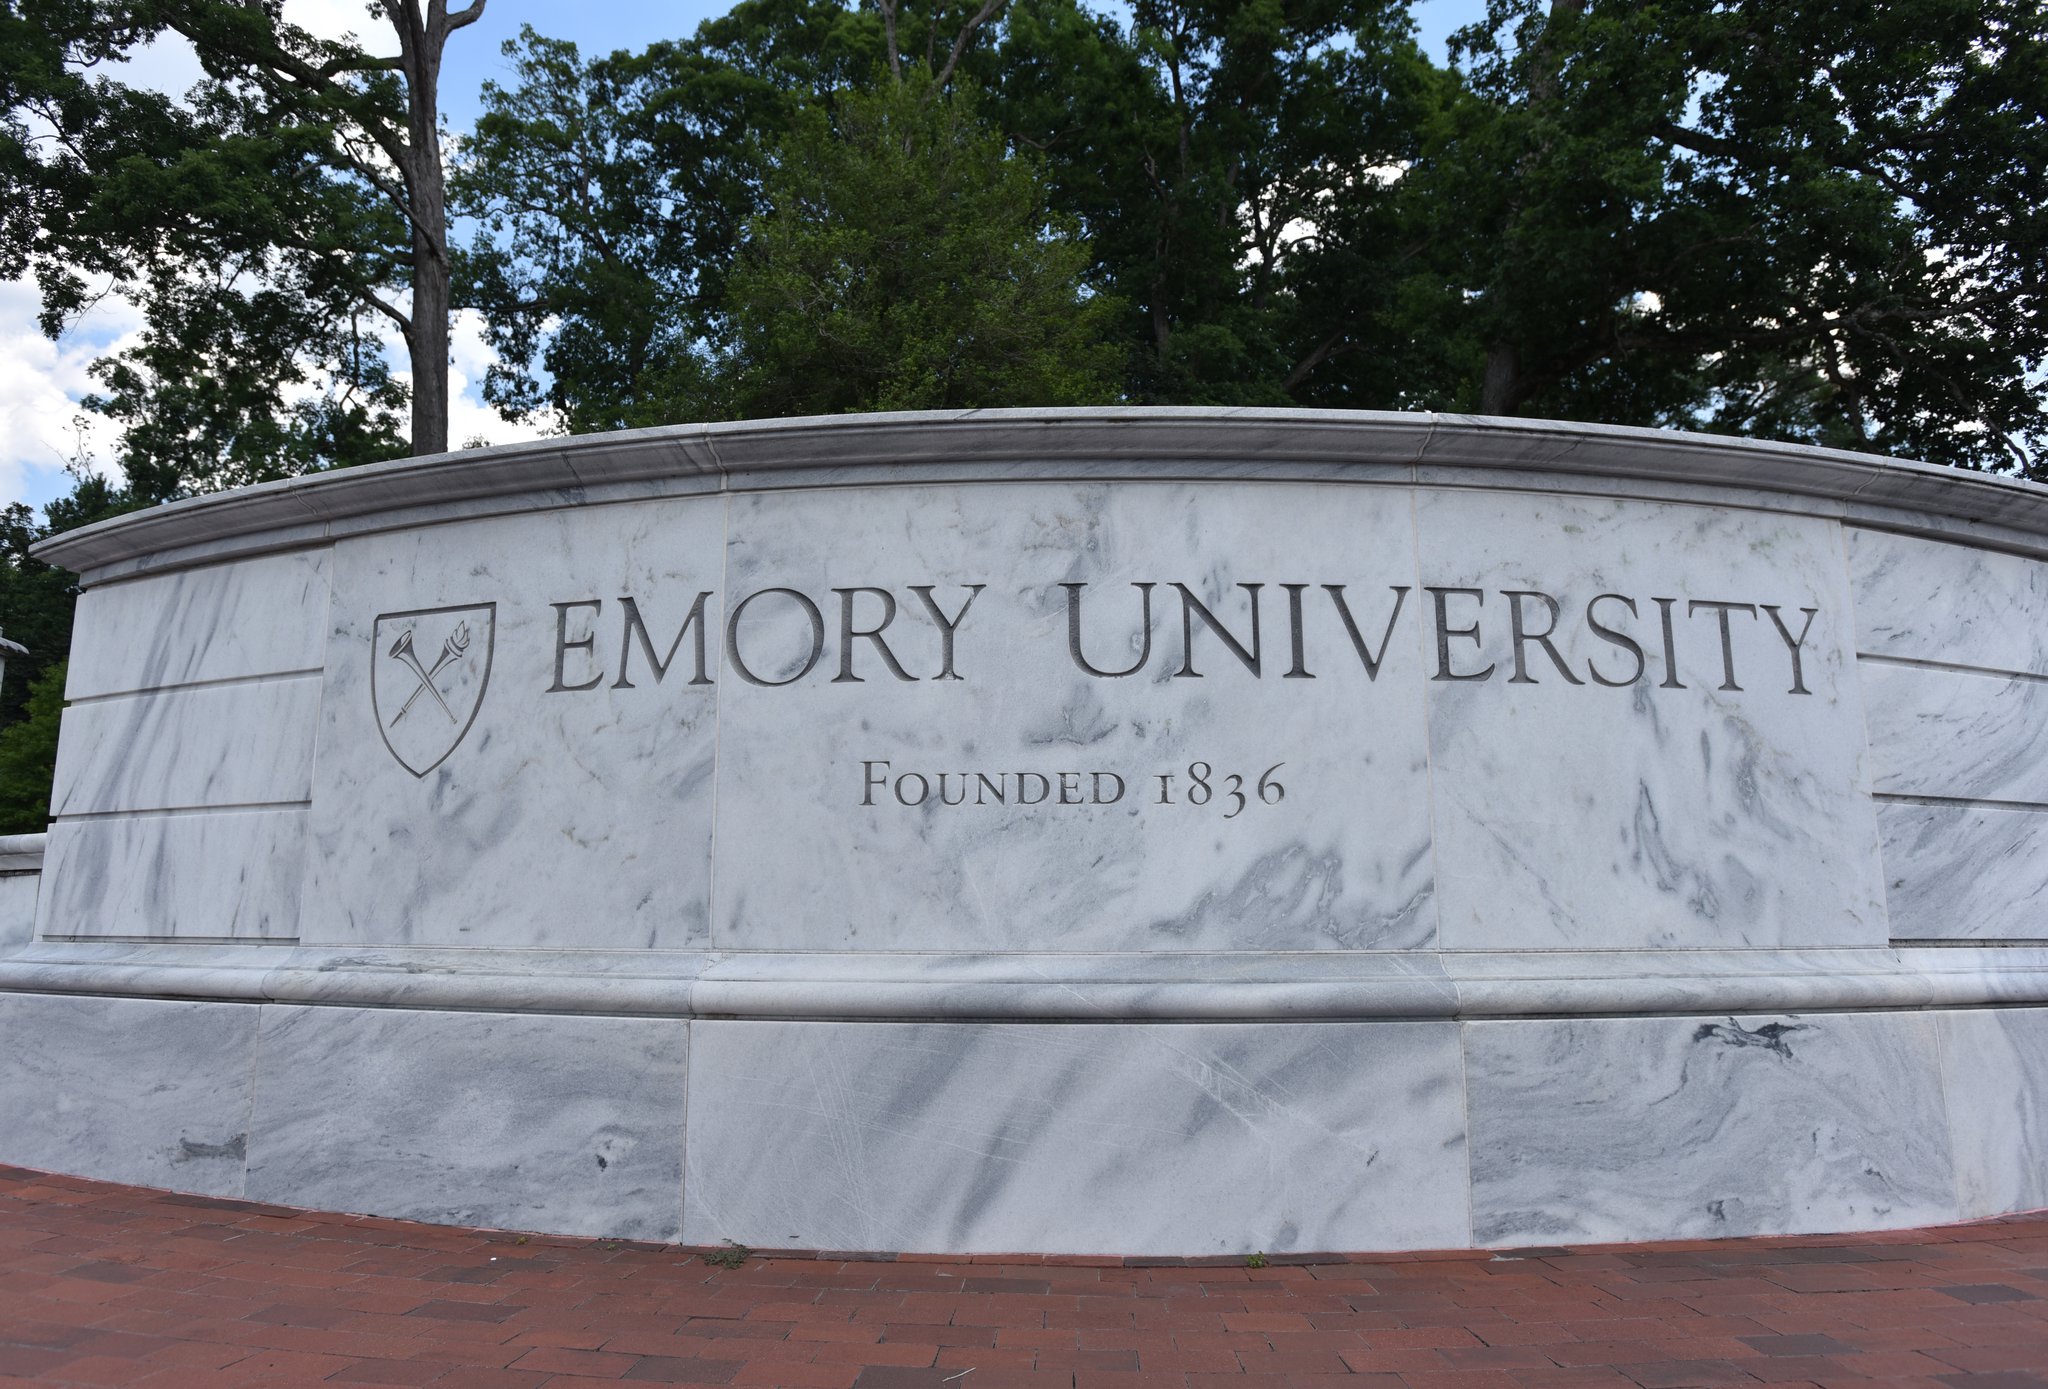 Emory University to rename buildings to address concerns over racism